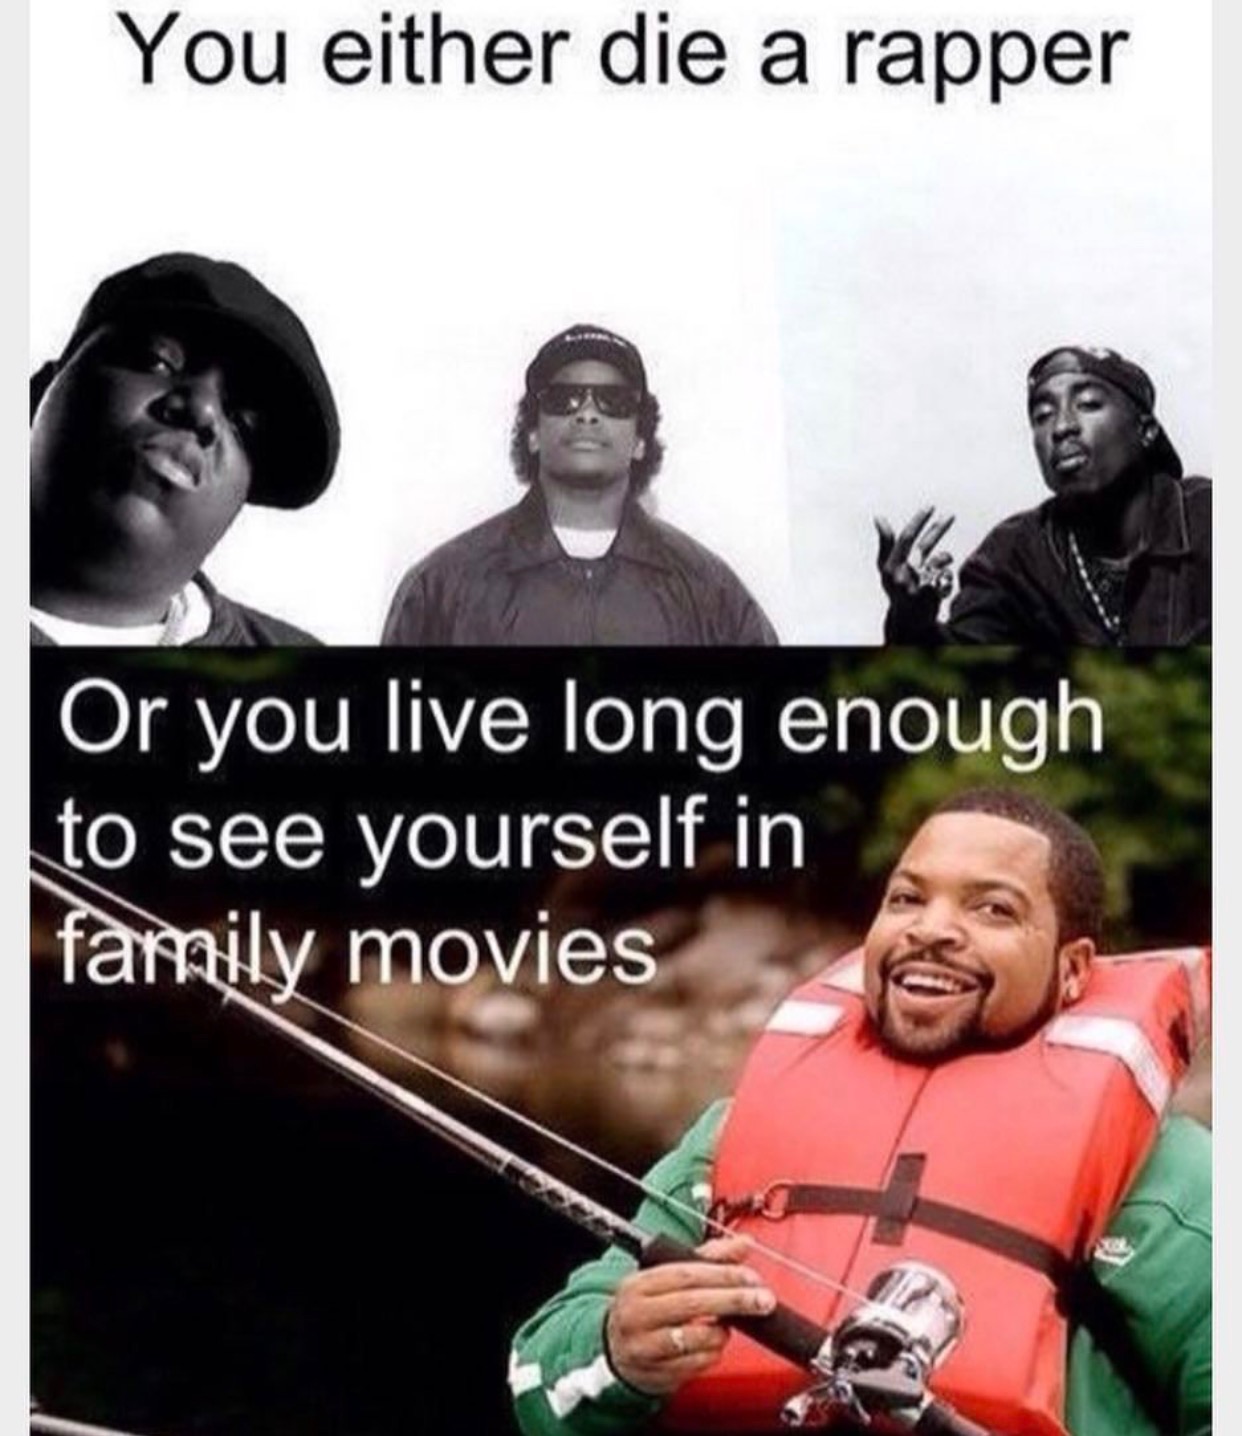 ice cube family movies - You either die a rapper Or you live long enough to see yourself in family movies